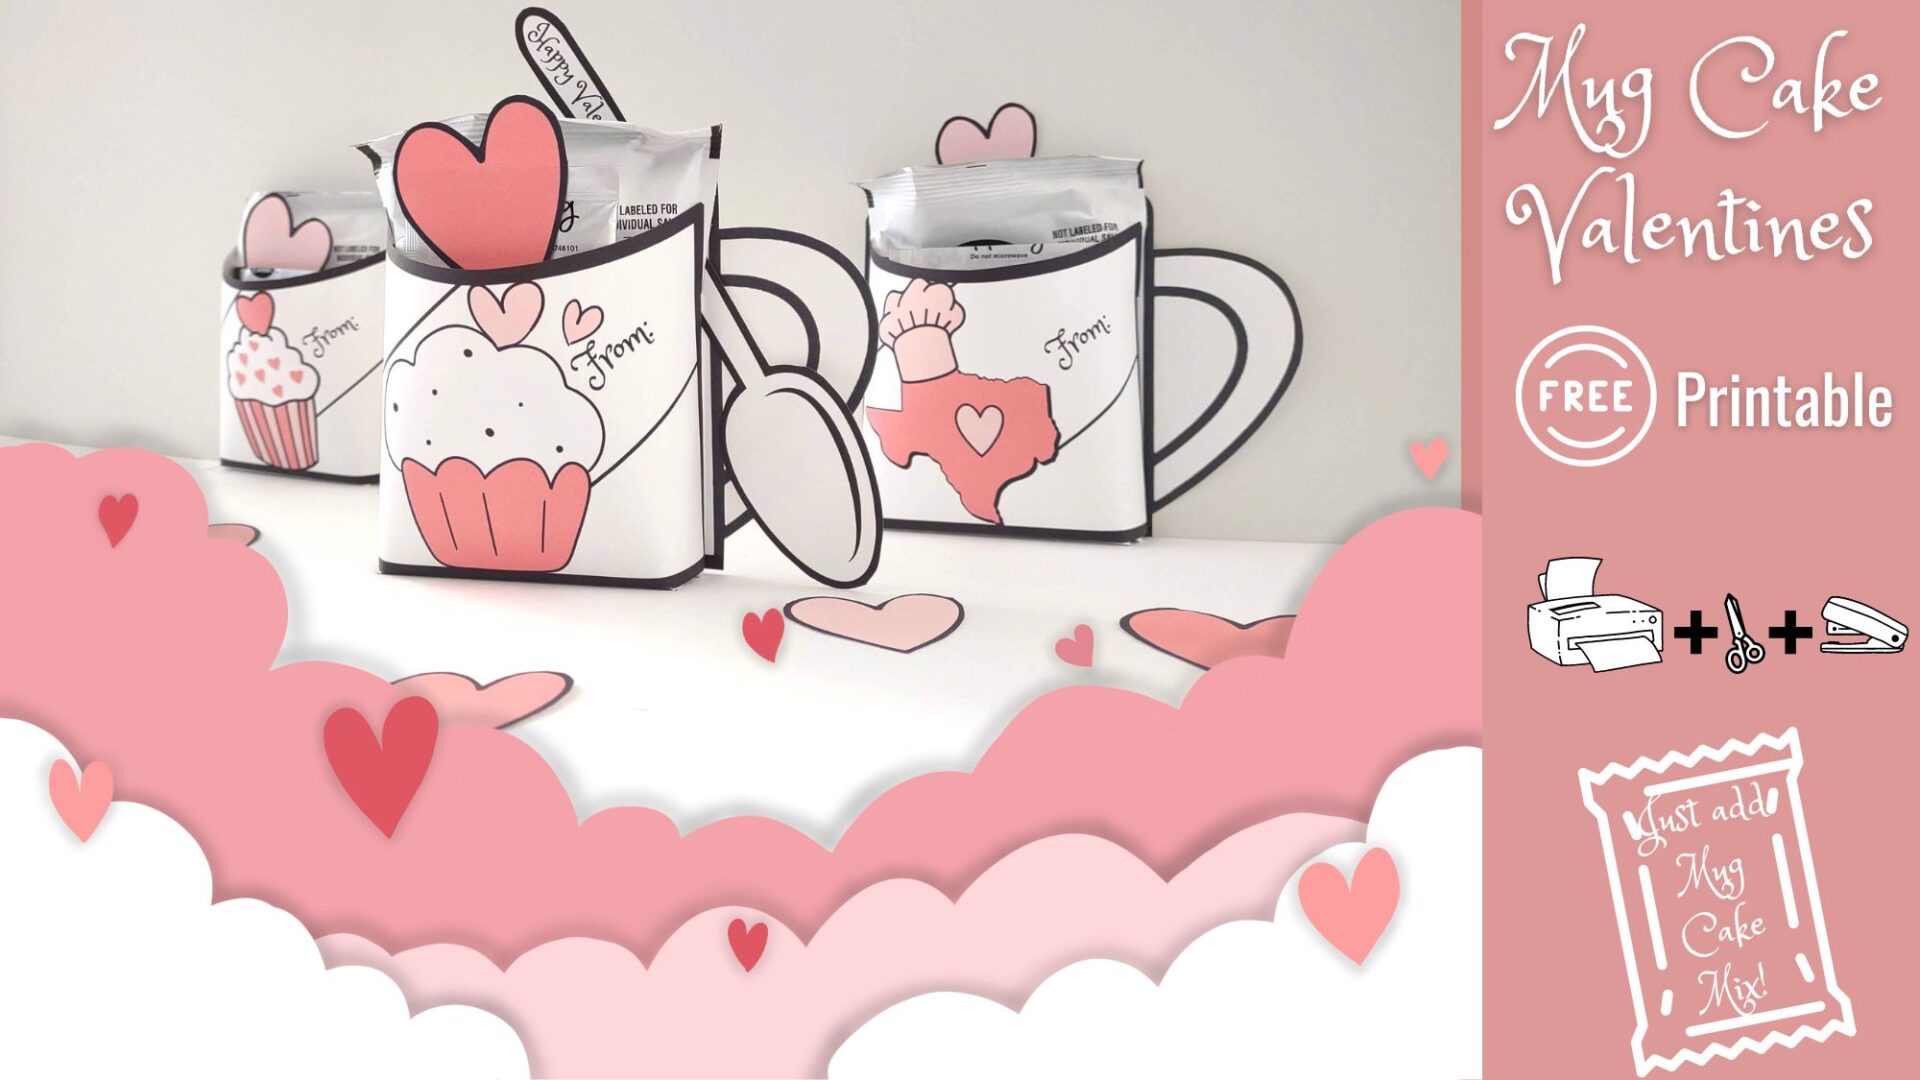 You are currently viewing Mug Cake Valentines | Free Printable